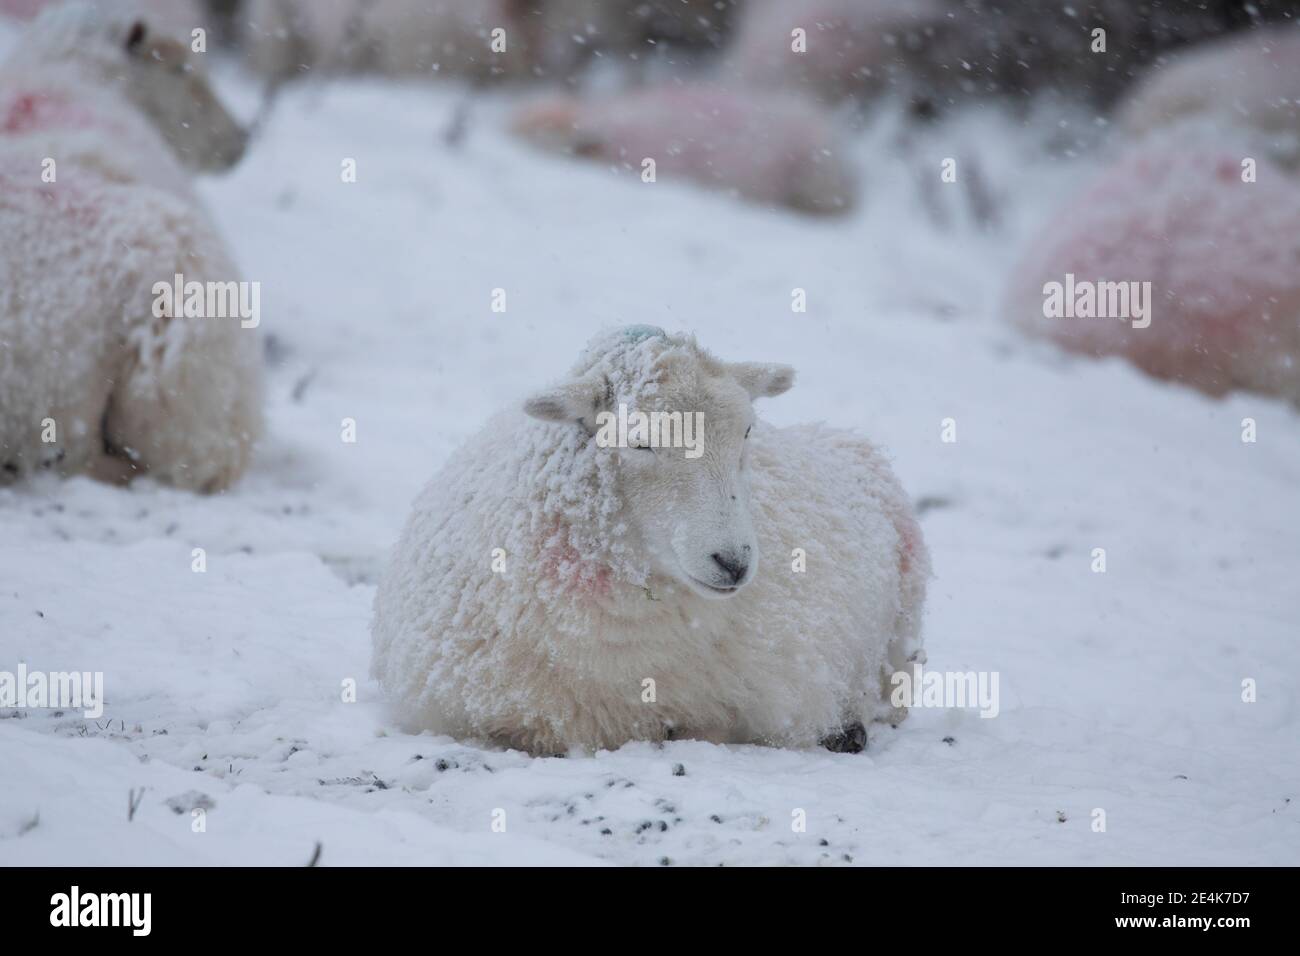 Flintshire, North Wales, UK Wednesday 24th January 2021, UK Weather:  Heavy snowfall in North Wales with a Met Office weather warning in place snow as a weather front tracks eastward across the country. A sheep covered in snow in the village of Rhes-y-Cae with snow expected all day for the area © DGDImages/Alamy Live News Stock Photo